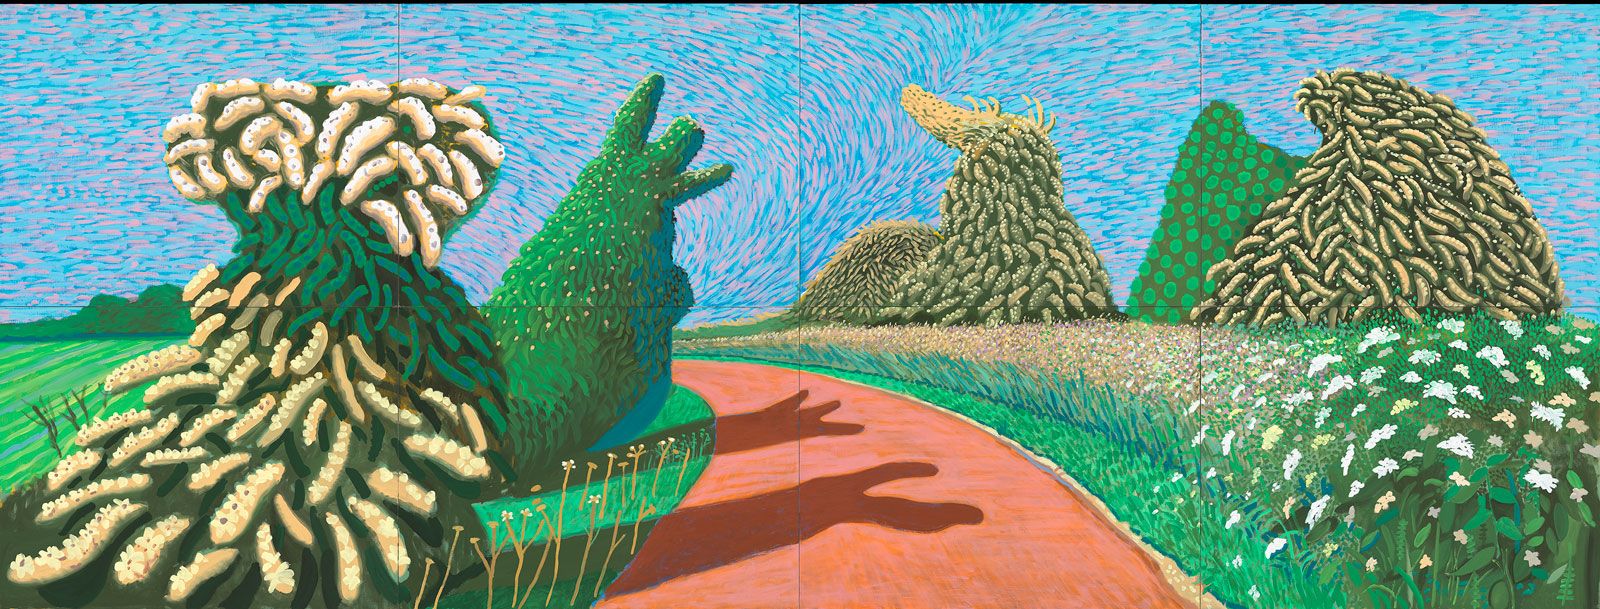 Hockney-Van Gogh exhibition is 'a tame, though colourful, bit of 